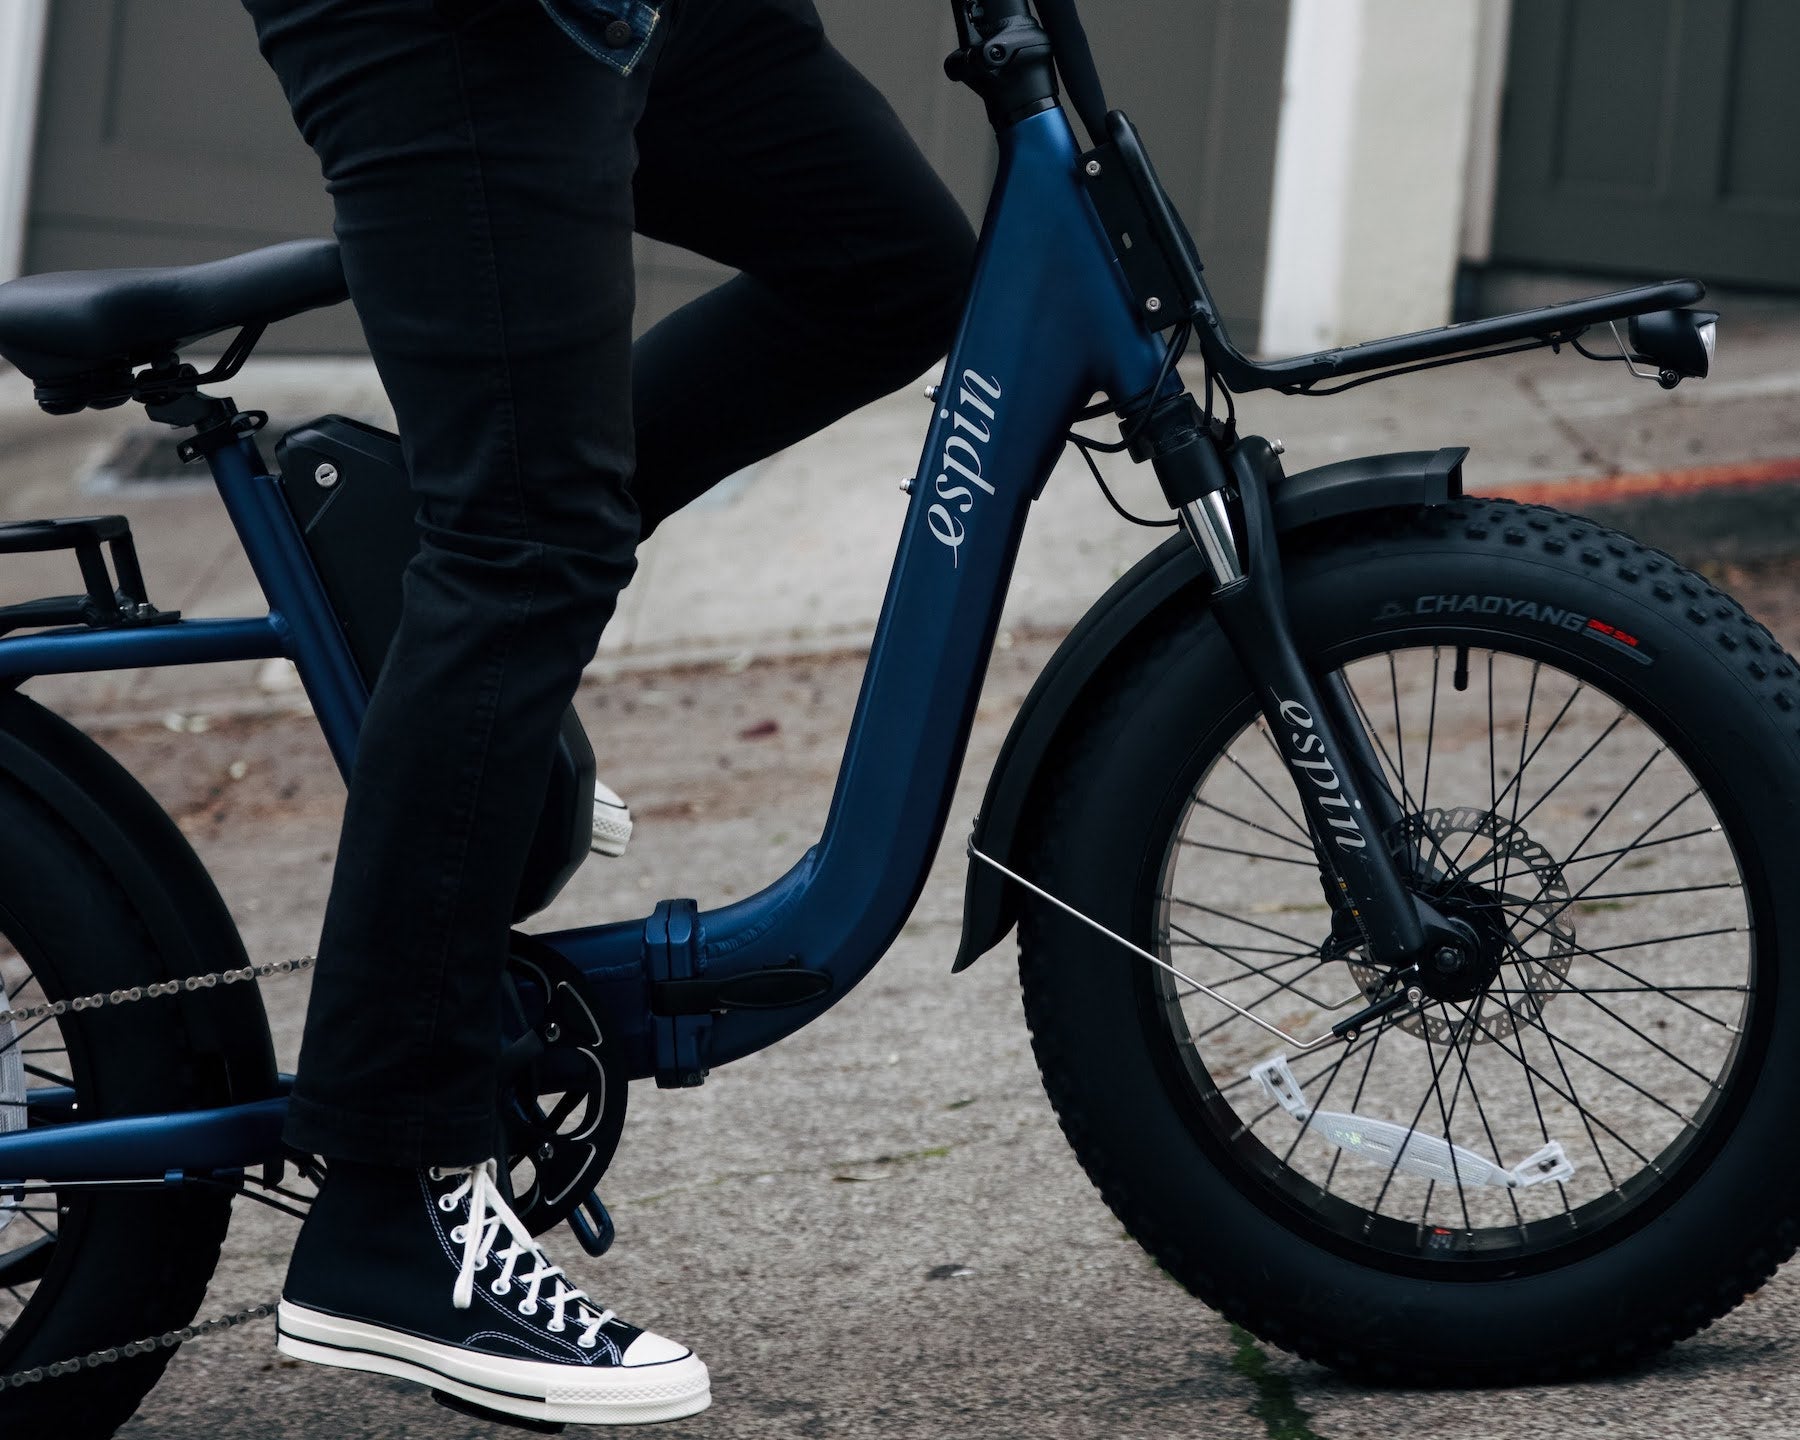 Why Are E-bikes Becoming More Popular